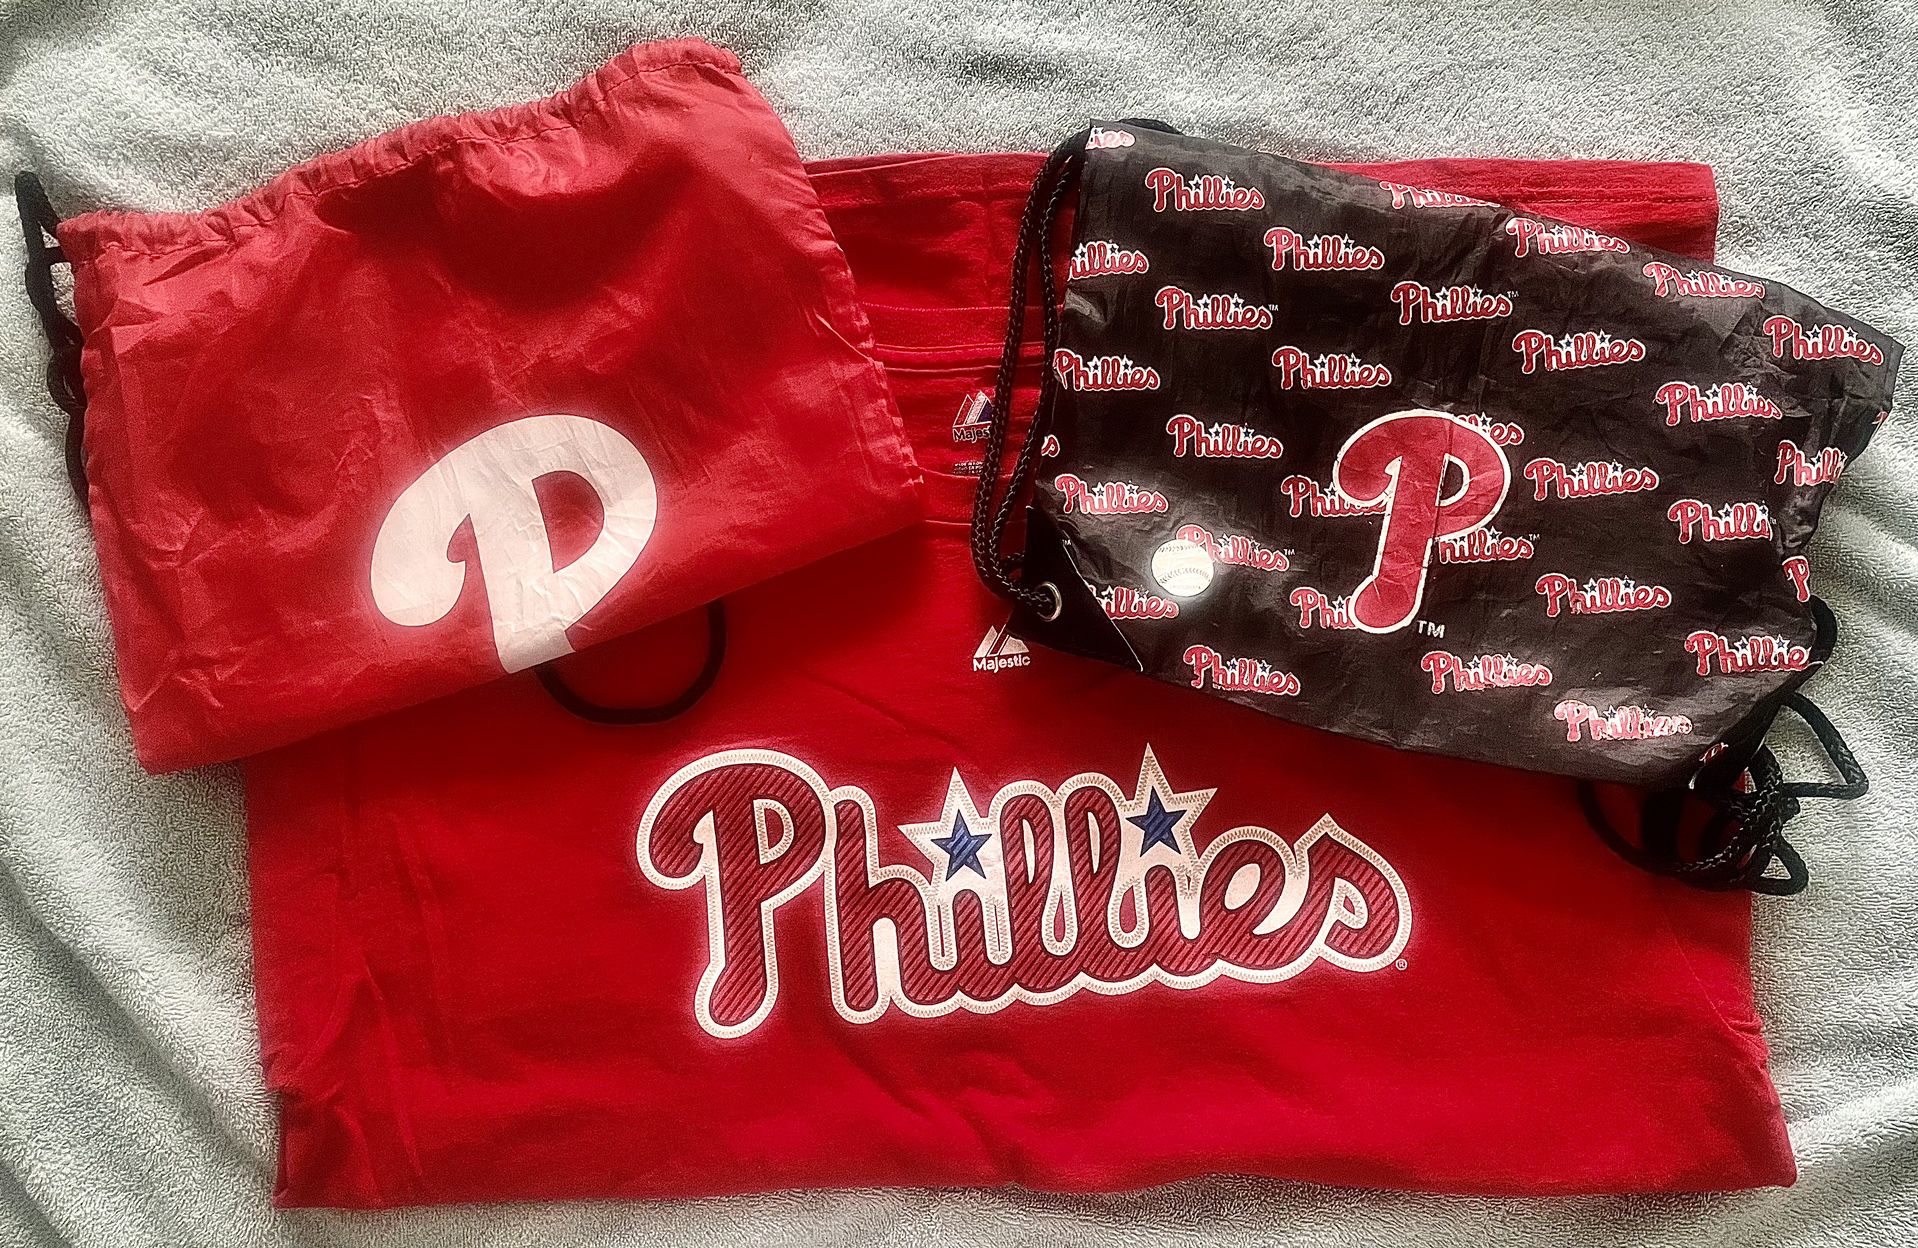 VINTAGE PHILLIES COLLECTION  - CLIFF LEE SHIRT + HIS & HERS “PHILLIES” BACKSACKS